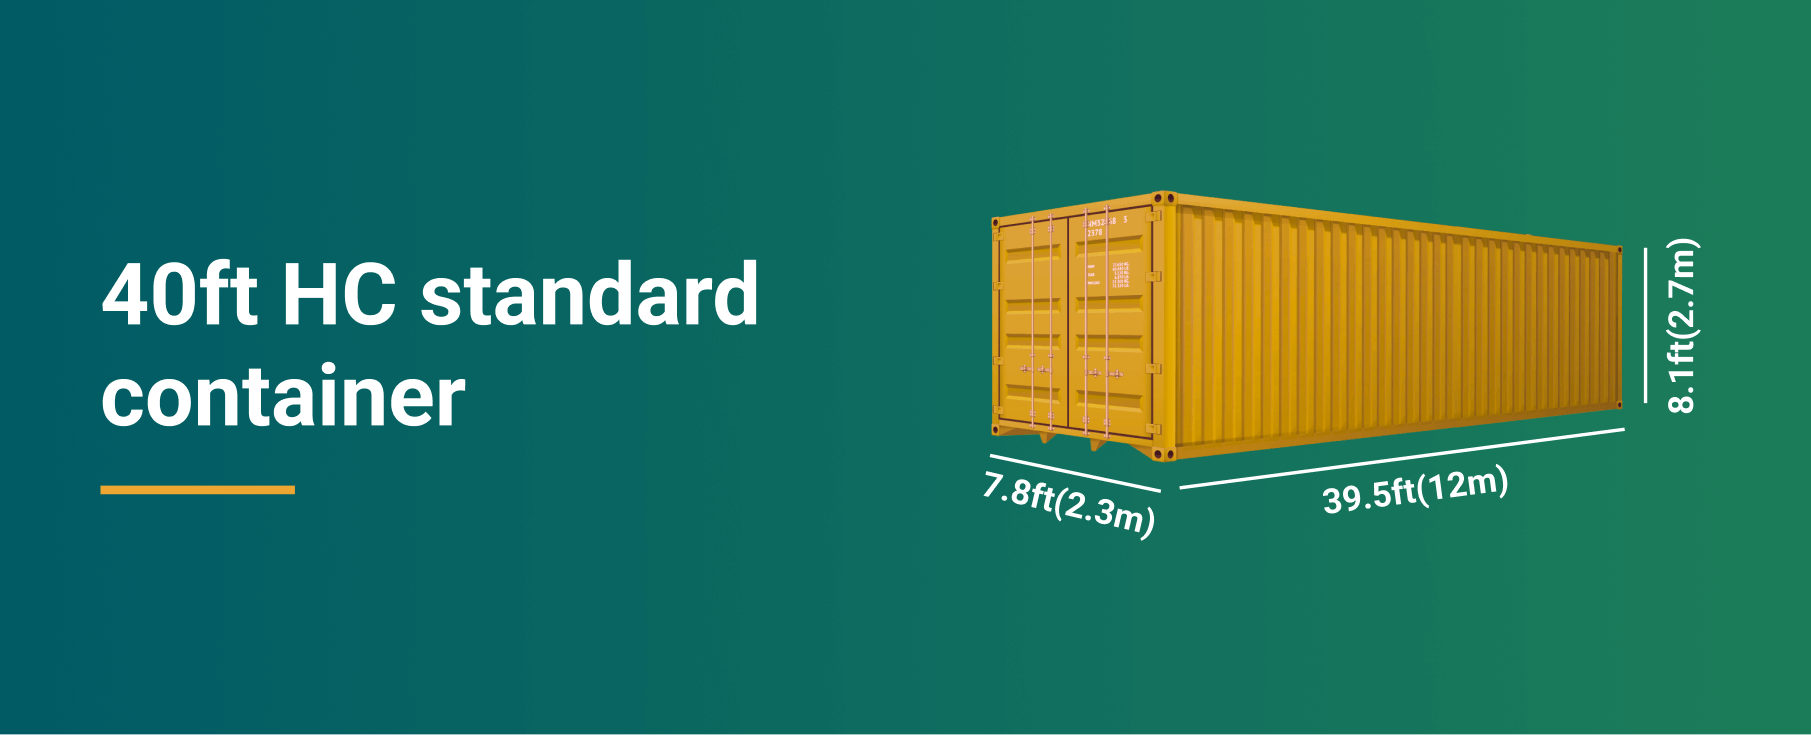 40ft HC container dimensions